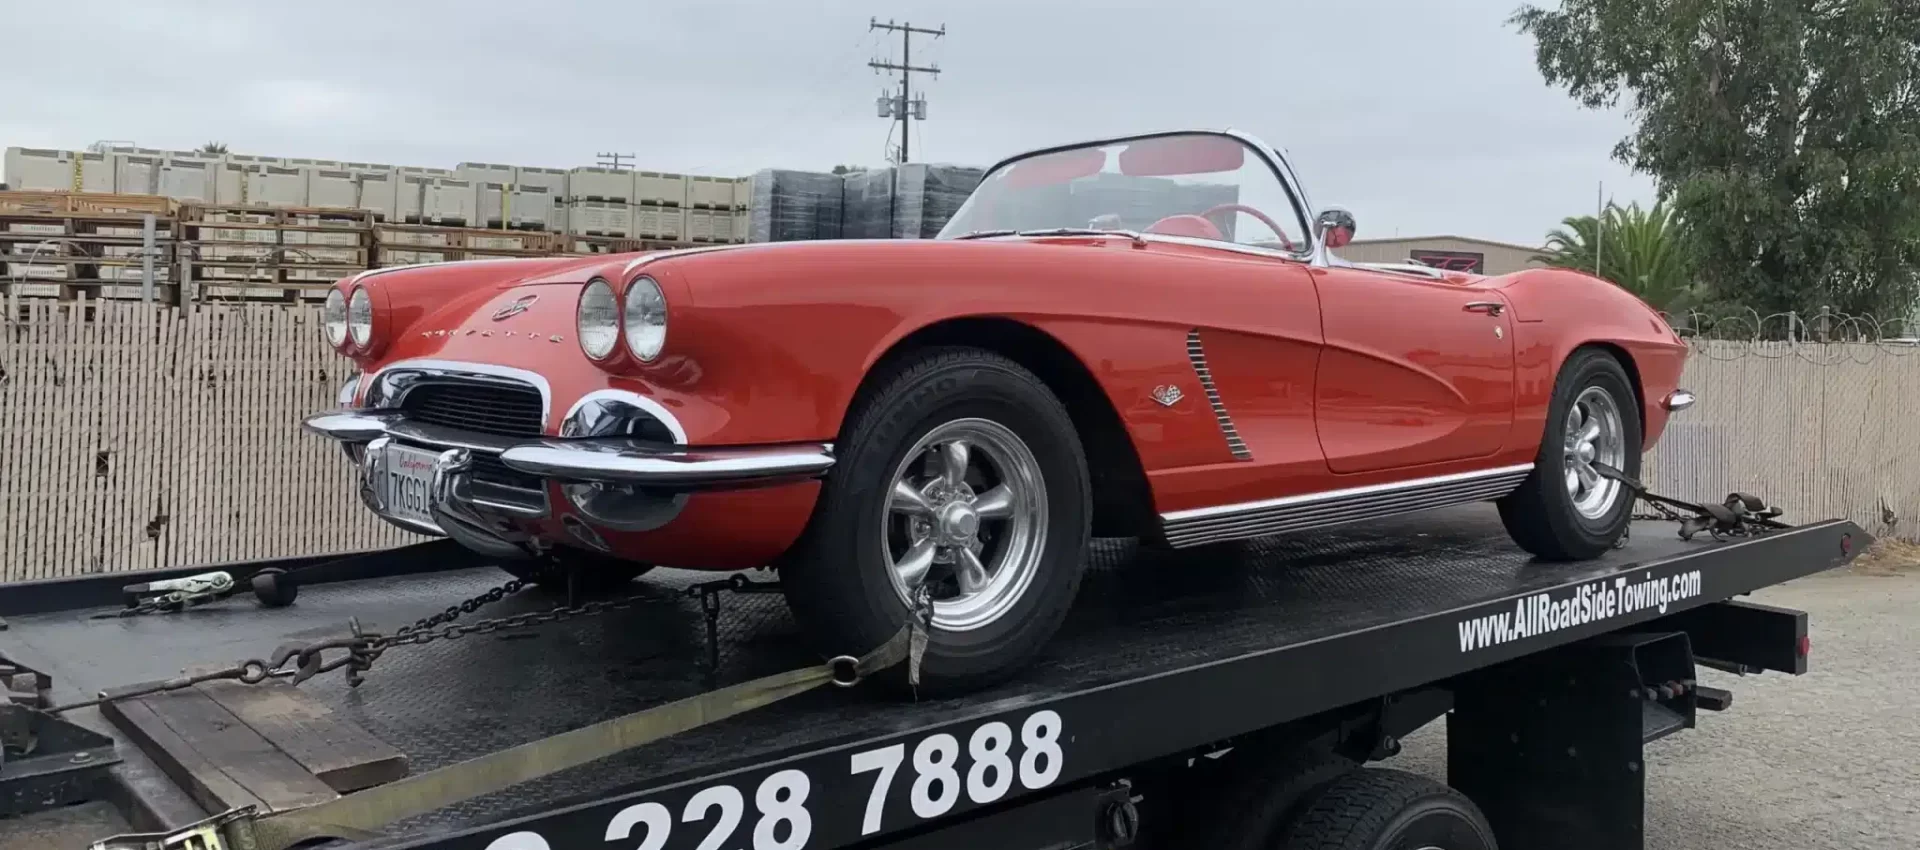 All Roadside Towing, loves go tow classic vette's!